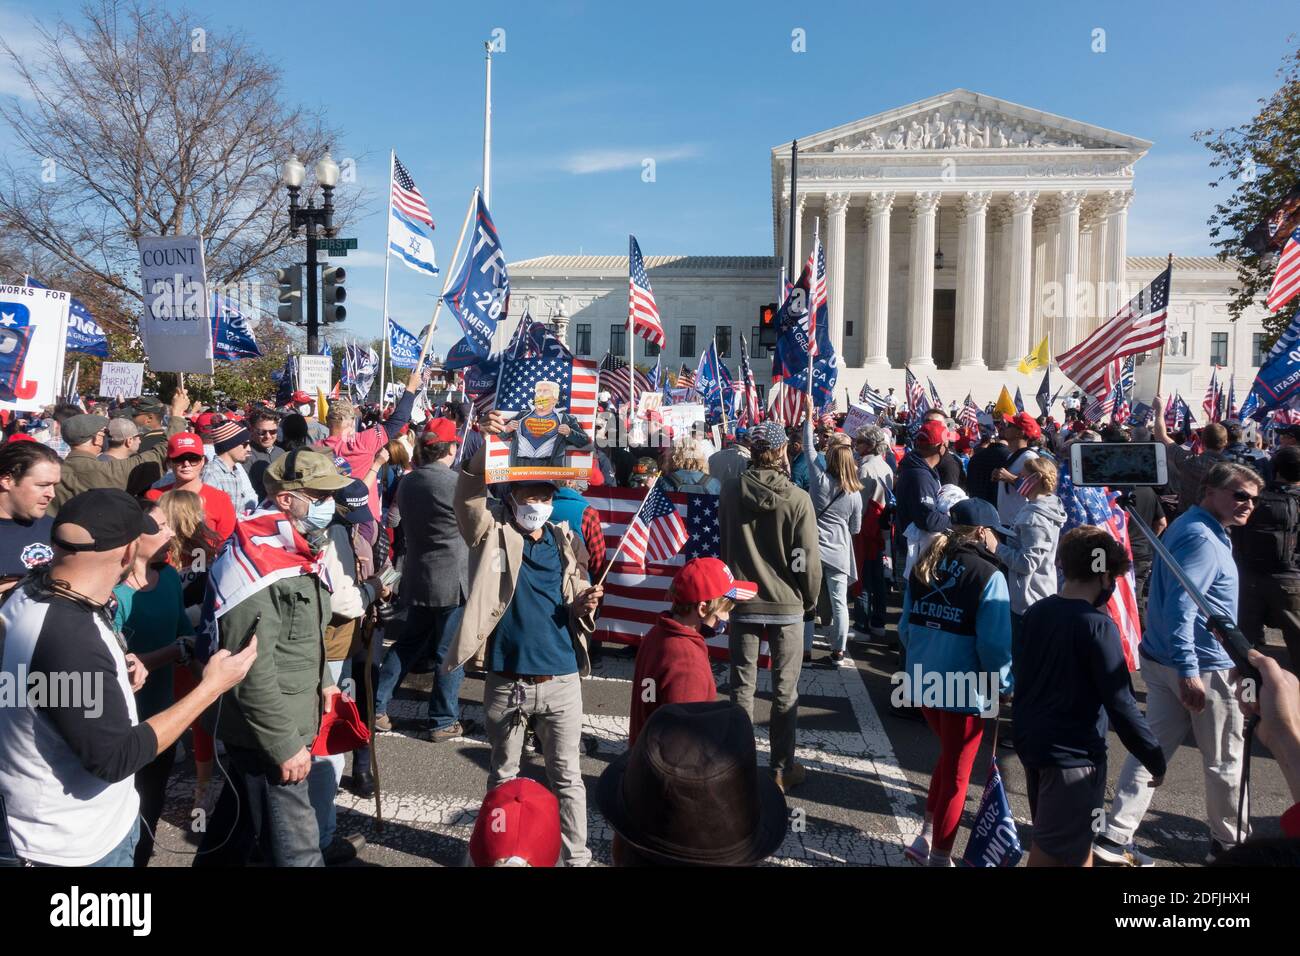 WASHINGTON, DC - NOV. 14, 2020: Trump supporters arrive at the Supreme Court after marching from a rally at Freedom Plaza in support of President Donald Trump, who refuses to concede the election. Event was organized by 'Women for America First,' 'Stop the Steal' and the 'Million MAGA March.' Stock Photo